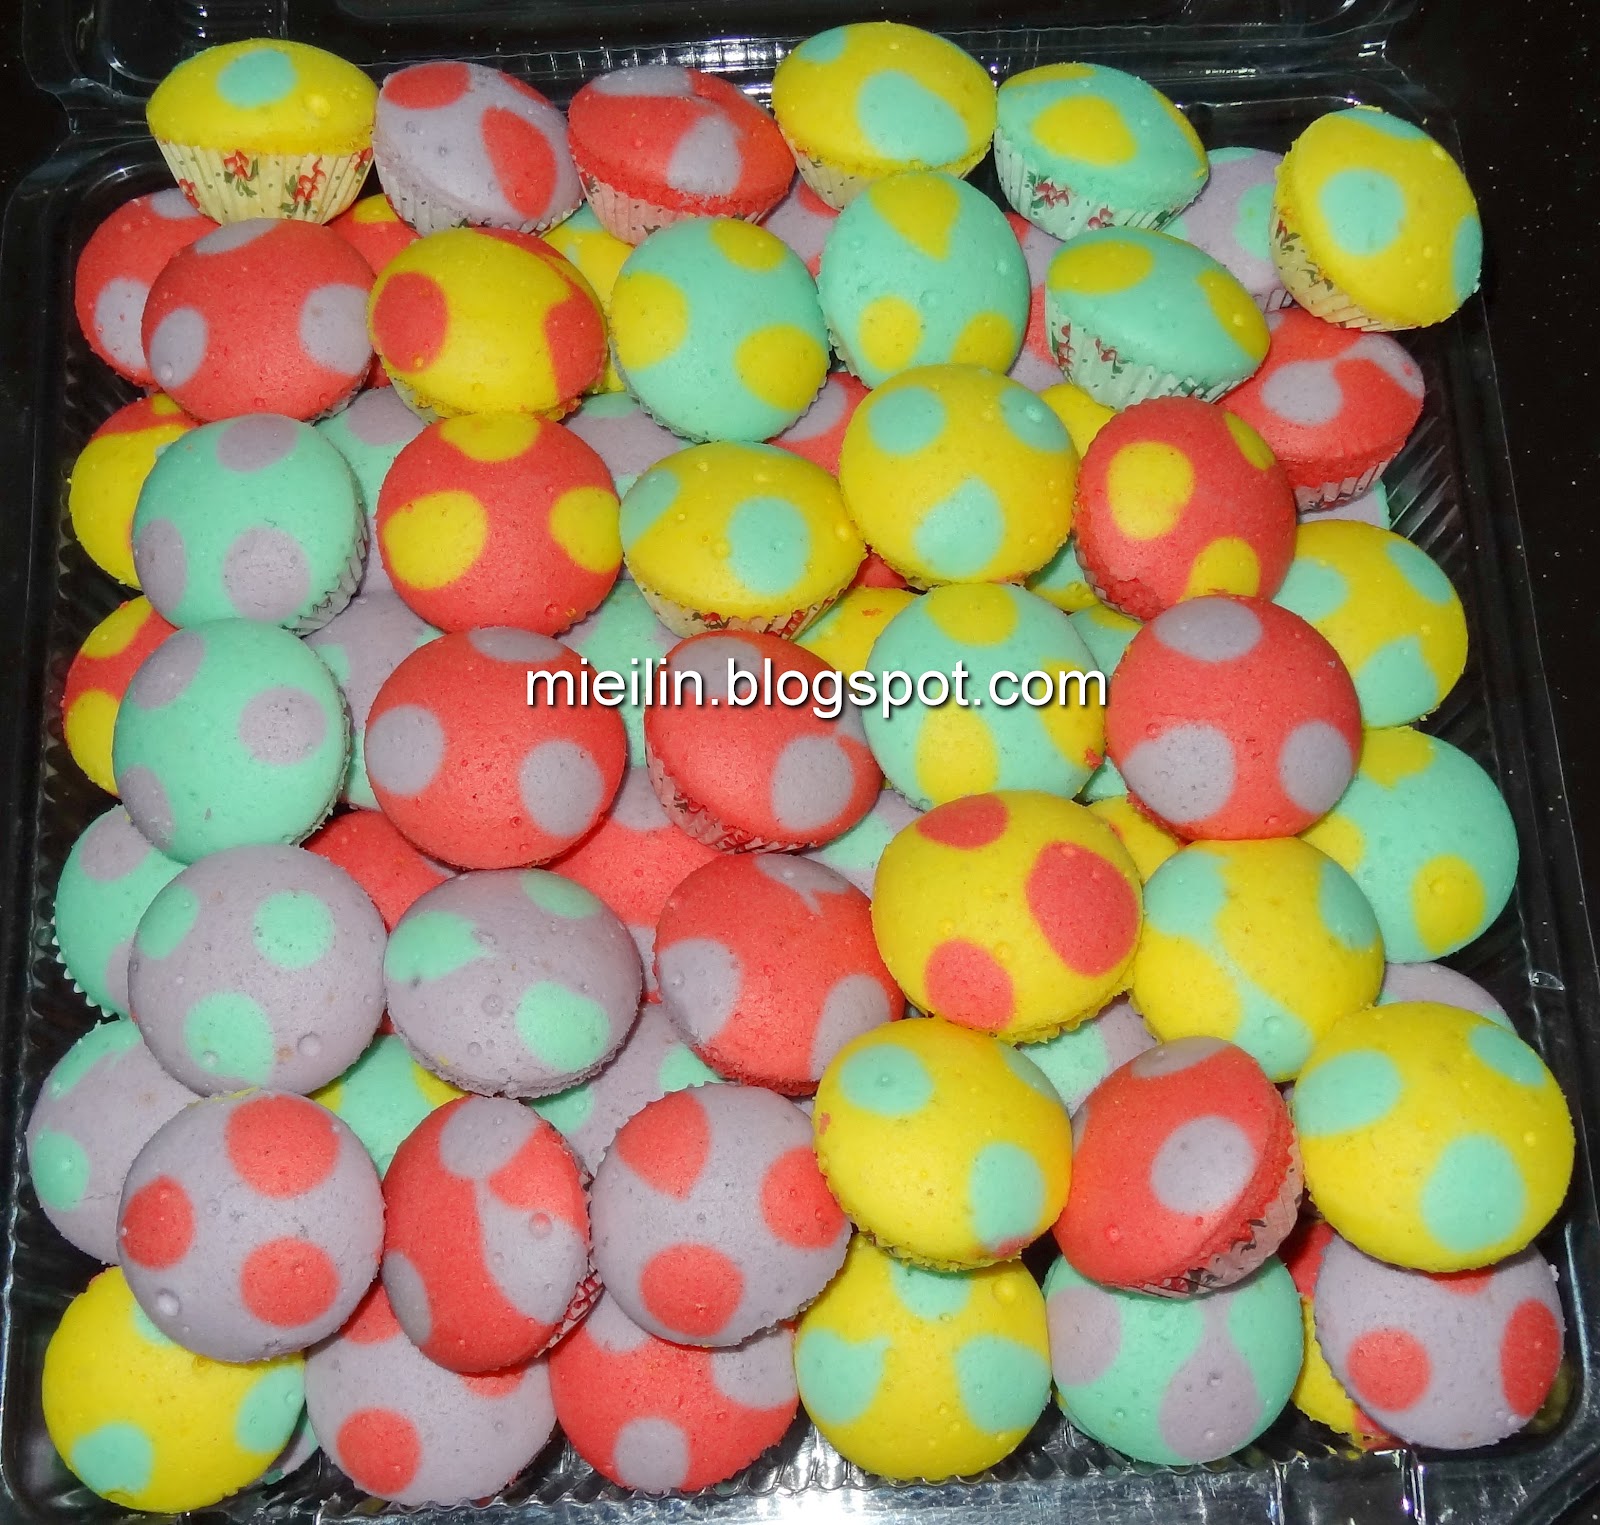 From MieIlin's Kitchen: Another Day of Apam Polka Dot